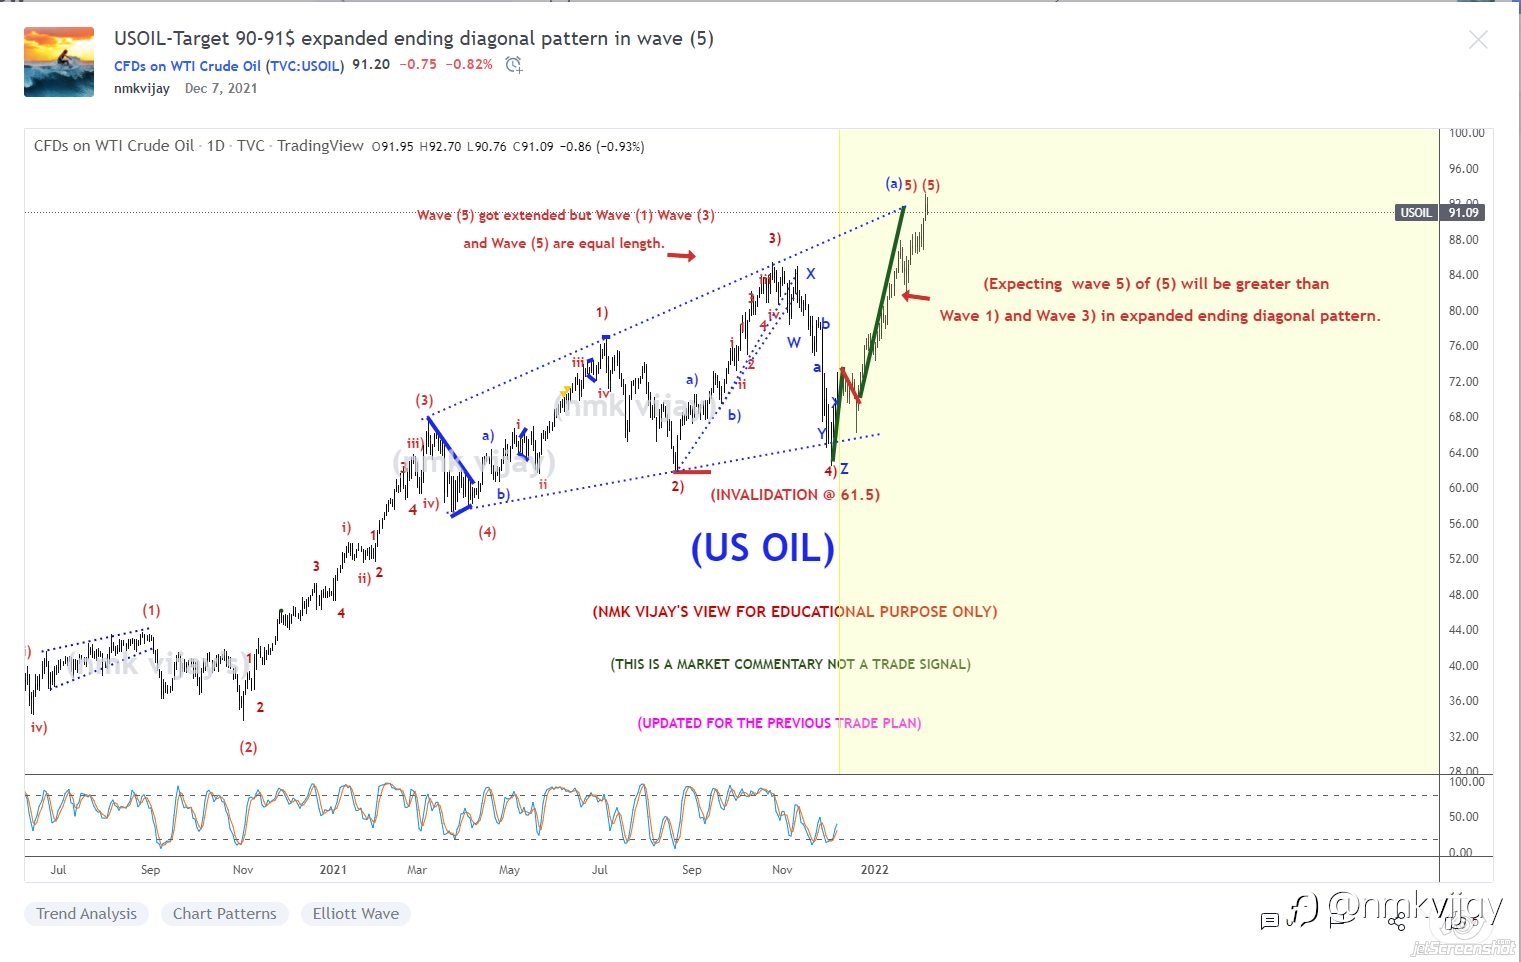 Target Reached in USOIL or CRUDE or WTI